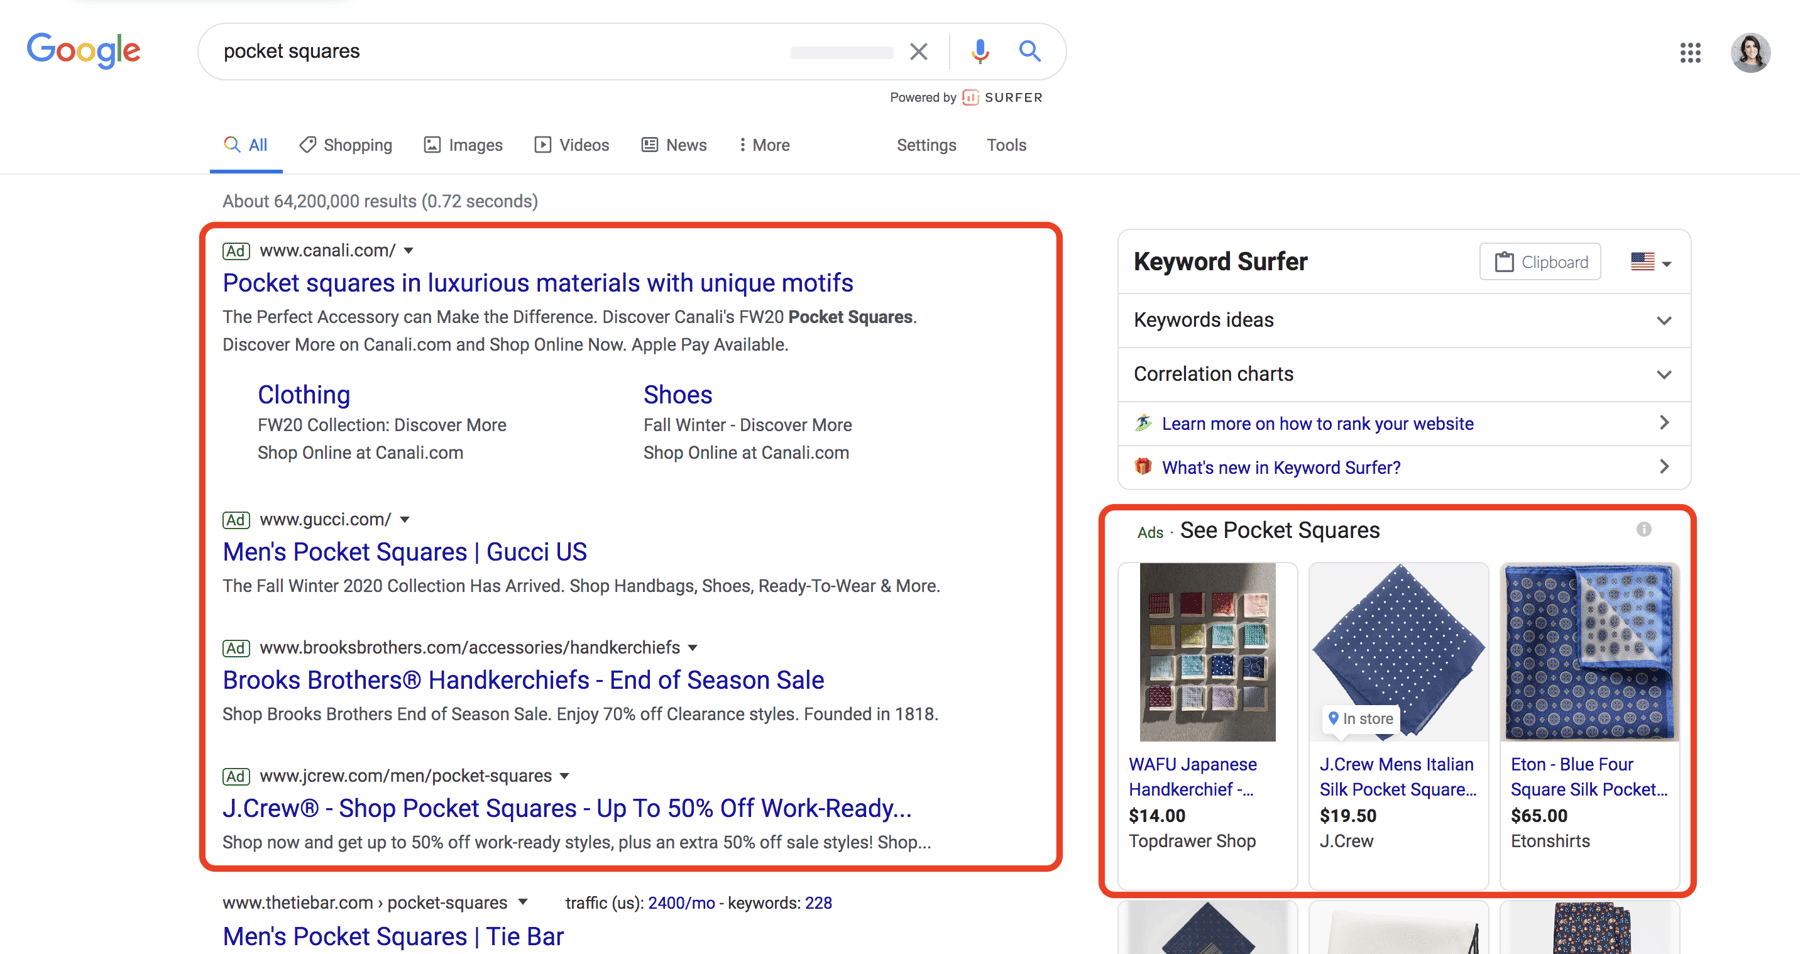 The Ultimate Guide to Google Ads [Examples]